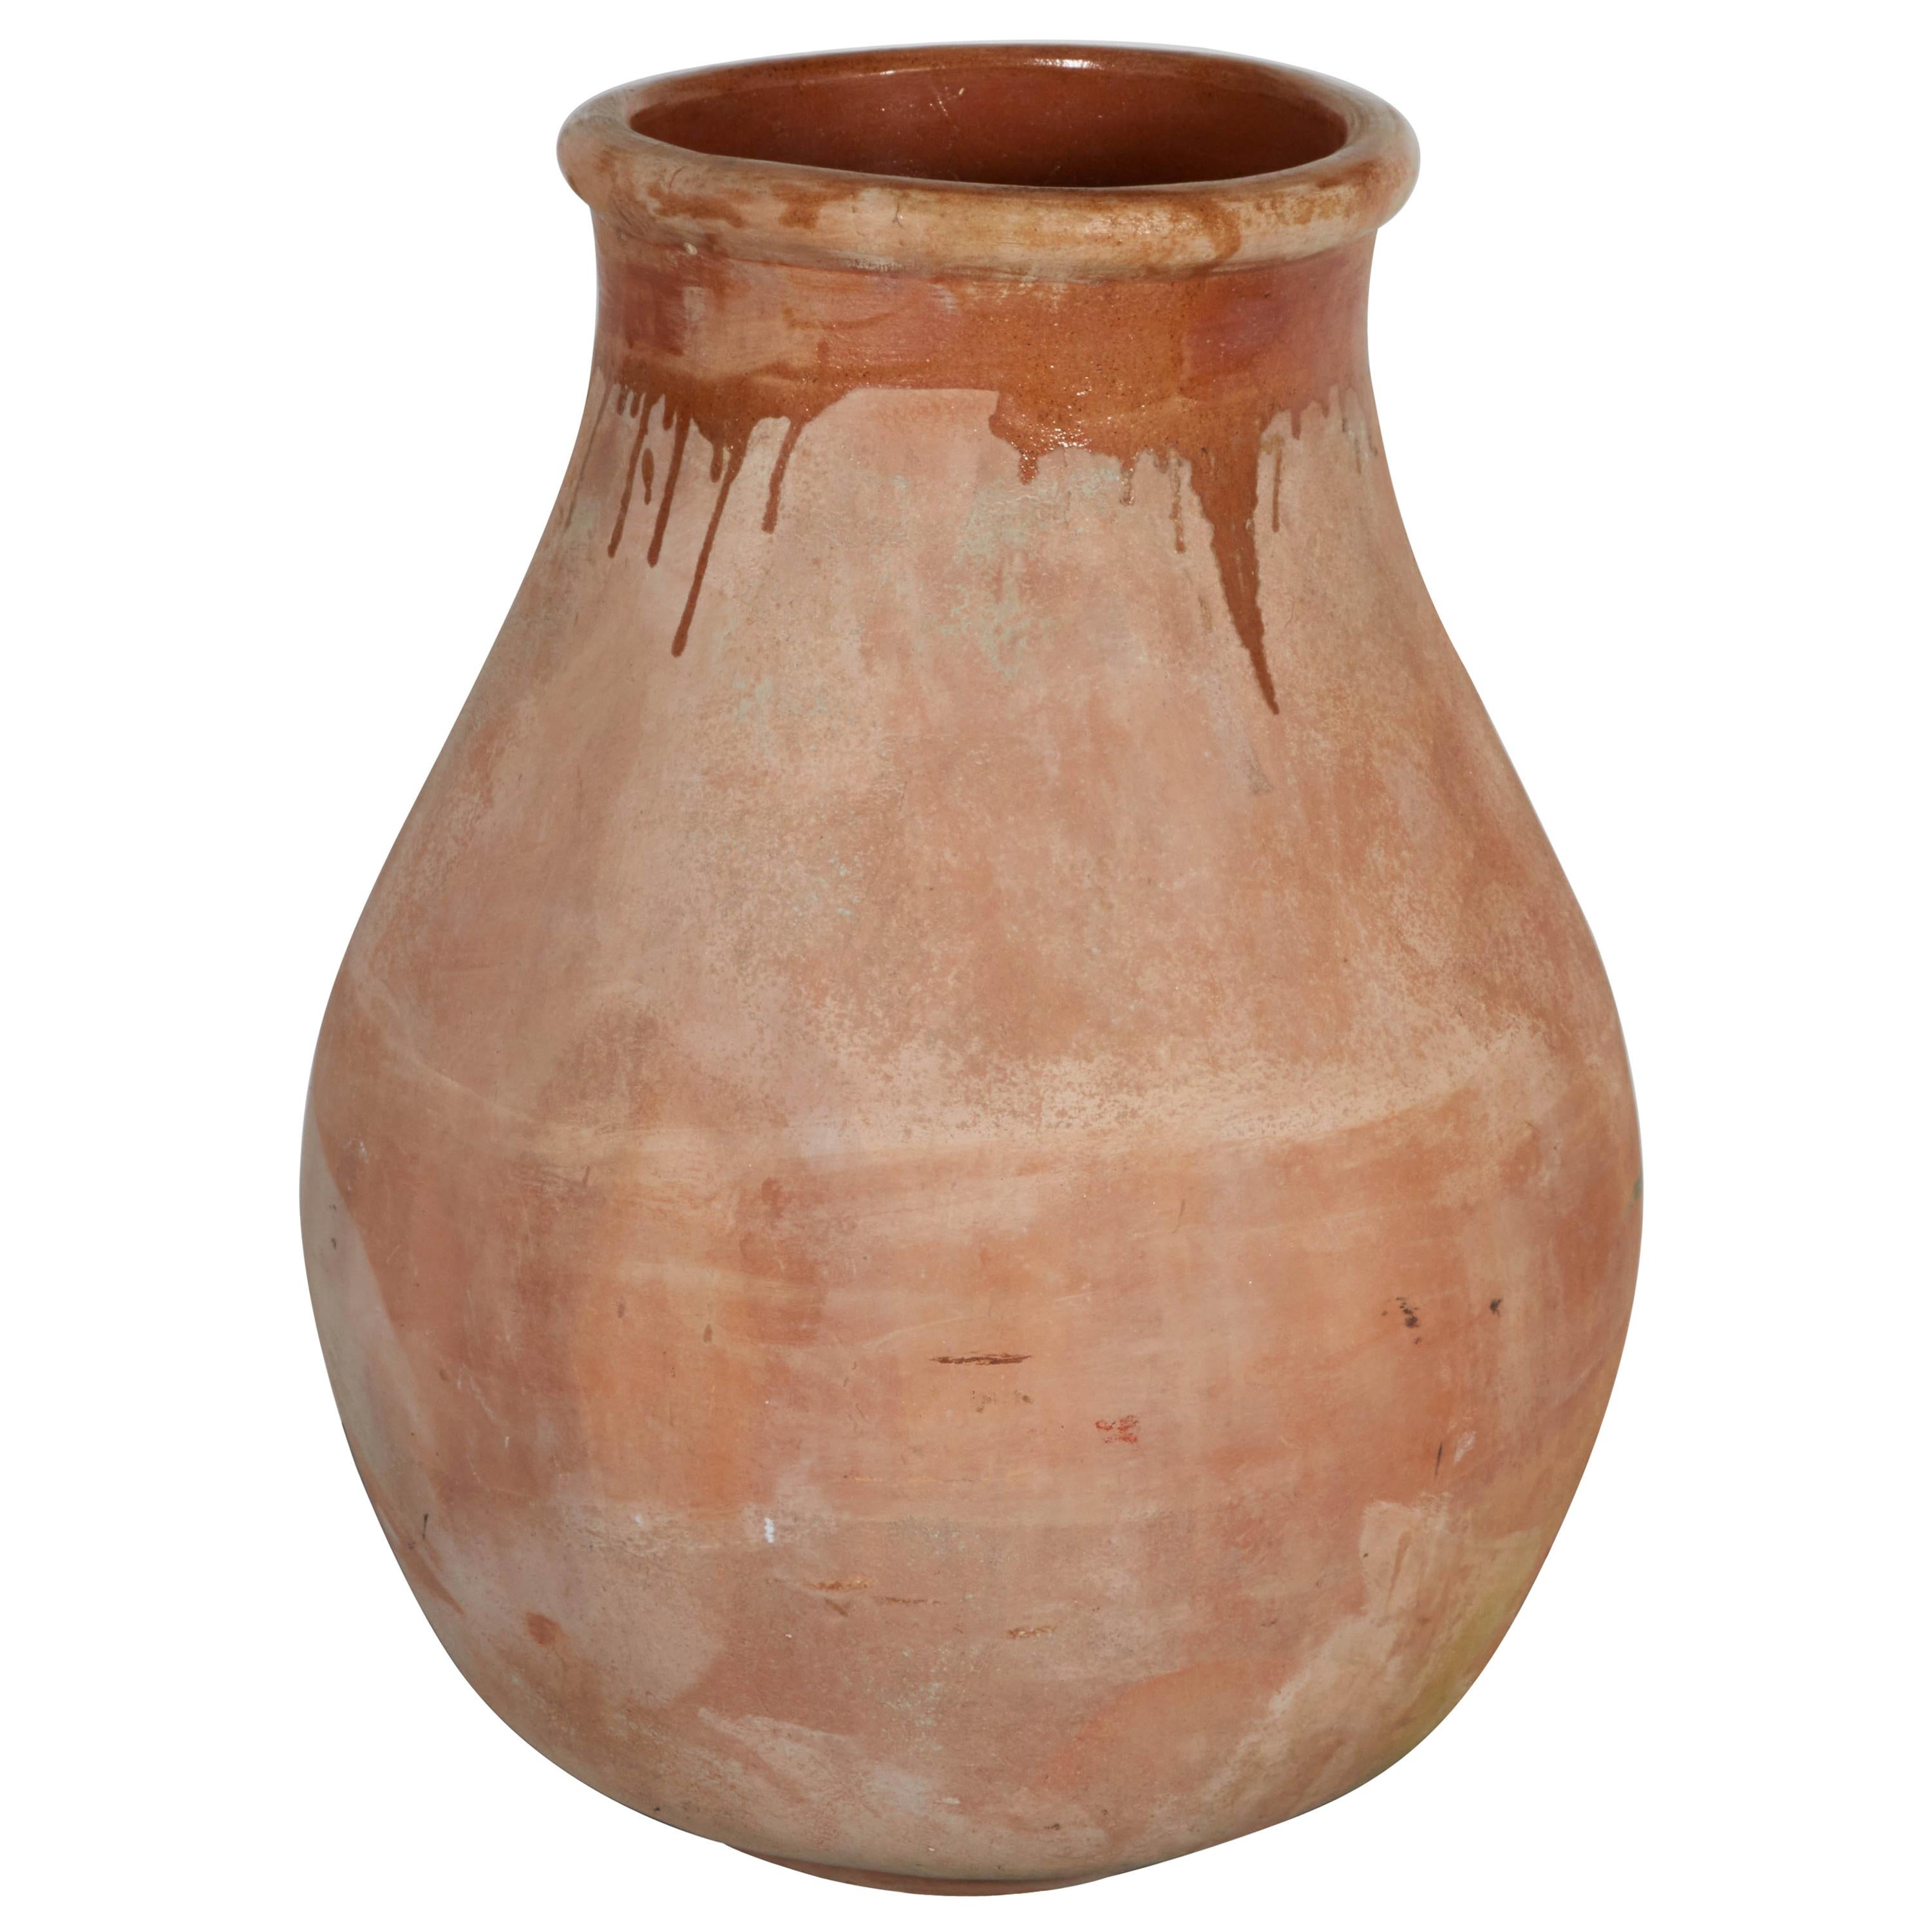 Tall, Graceful Earthenware Jar in Washed Out Mediterranean Hues For Sale